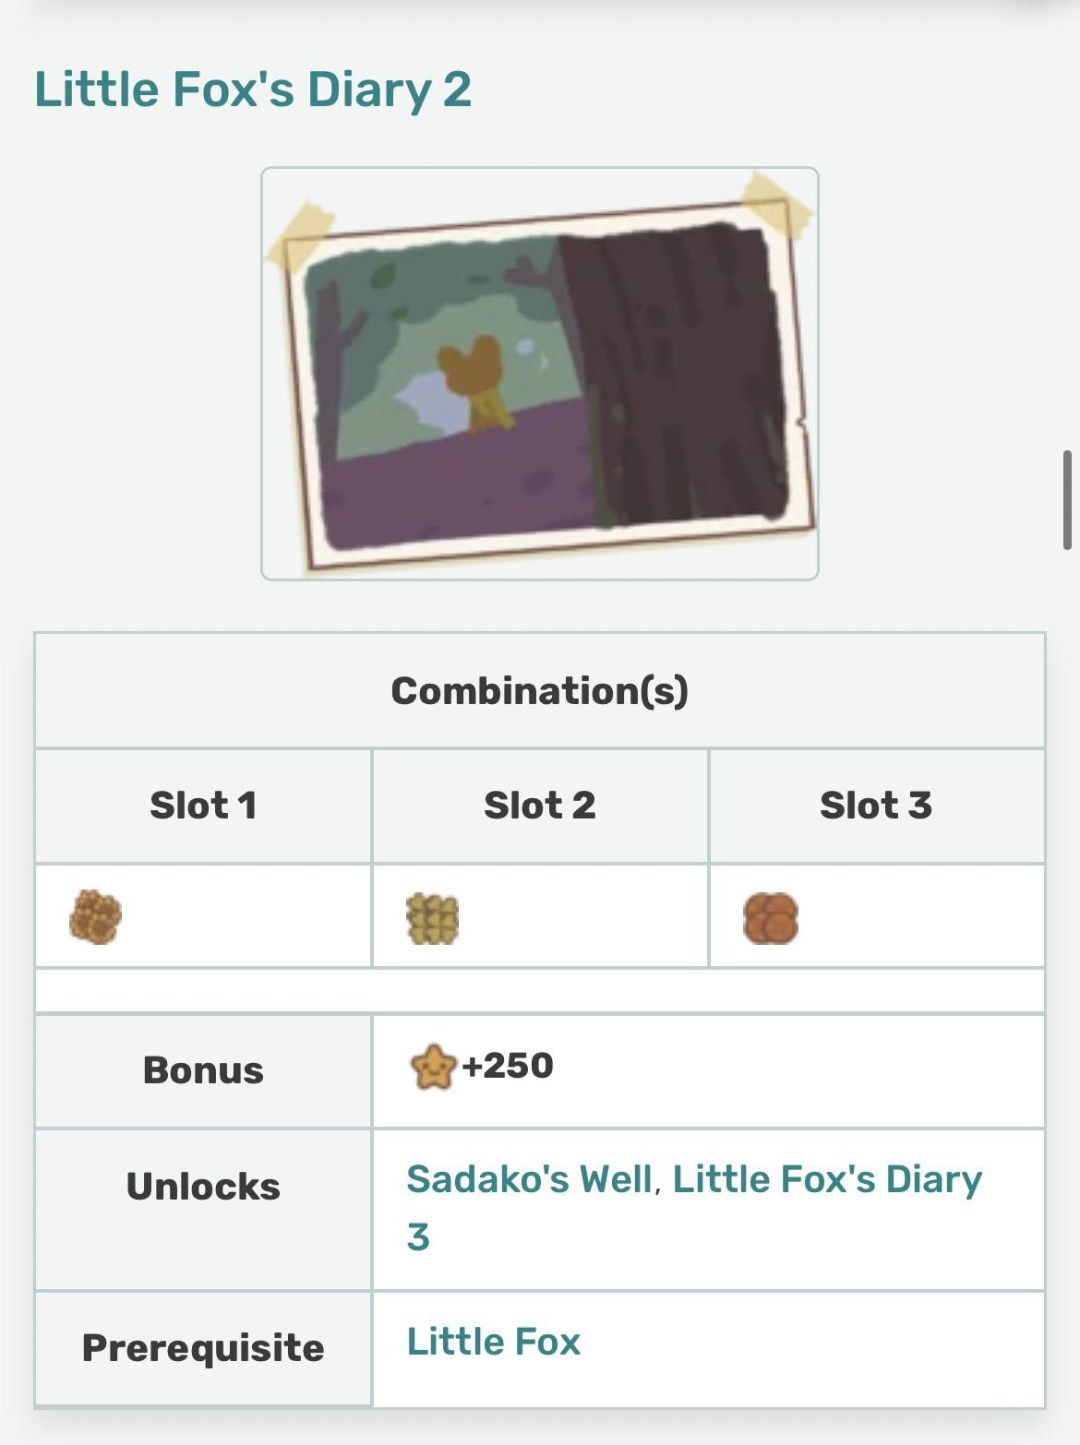 Picture of: What is the right combo for little fox diary ? When viewed it